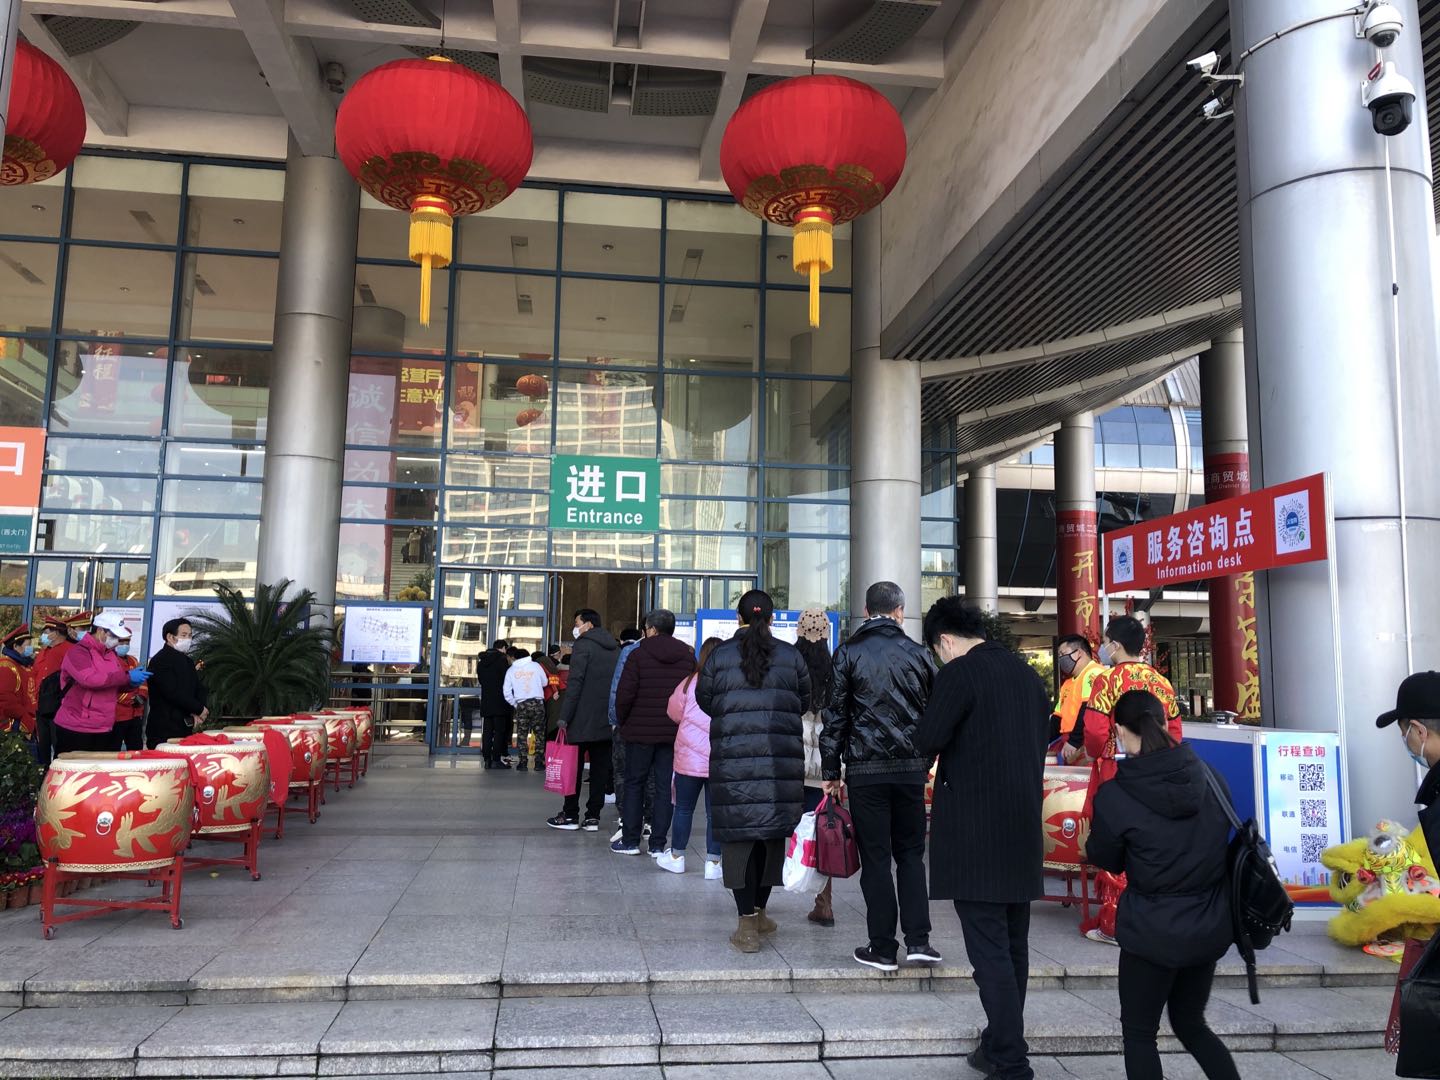 District 1 and 2 of Yiwu Futian market opened on Feb. 18, 2020.